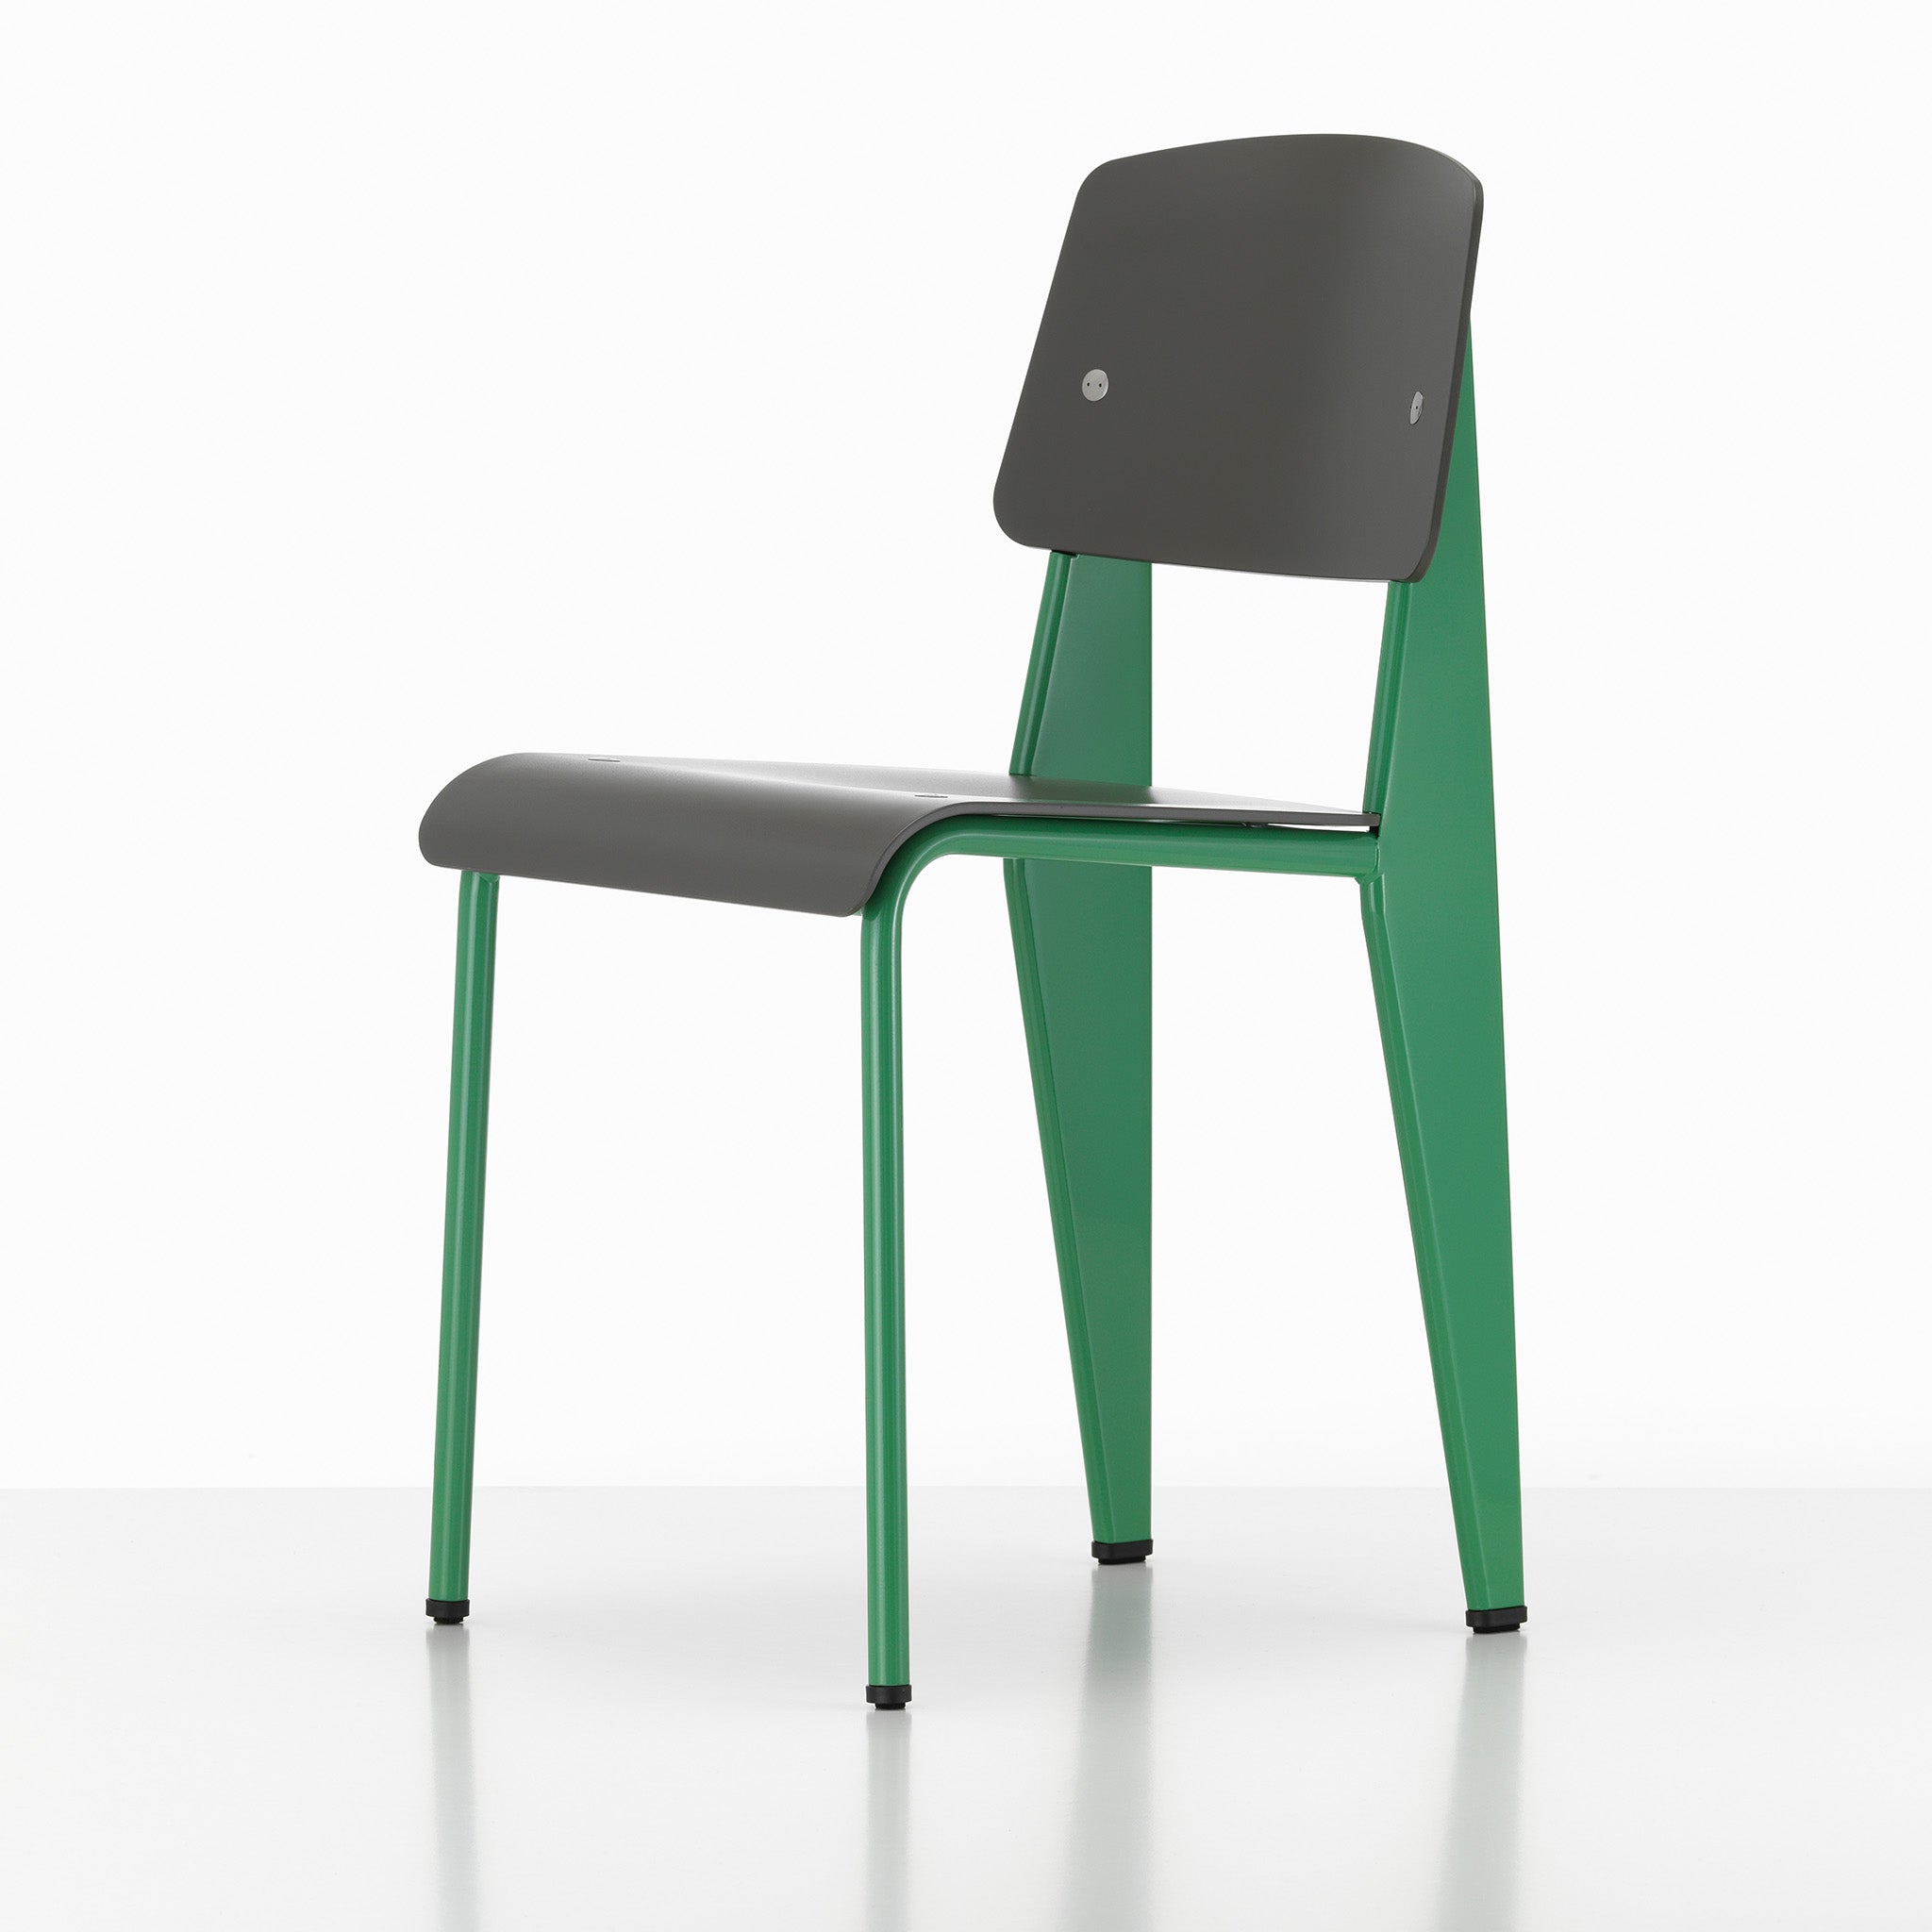 Standard SP chair by Vitra